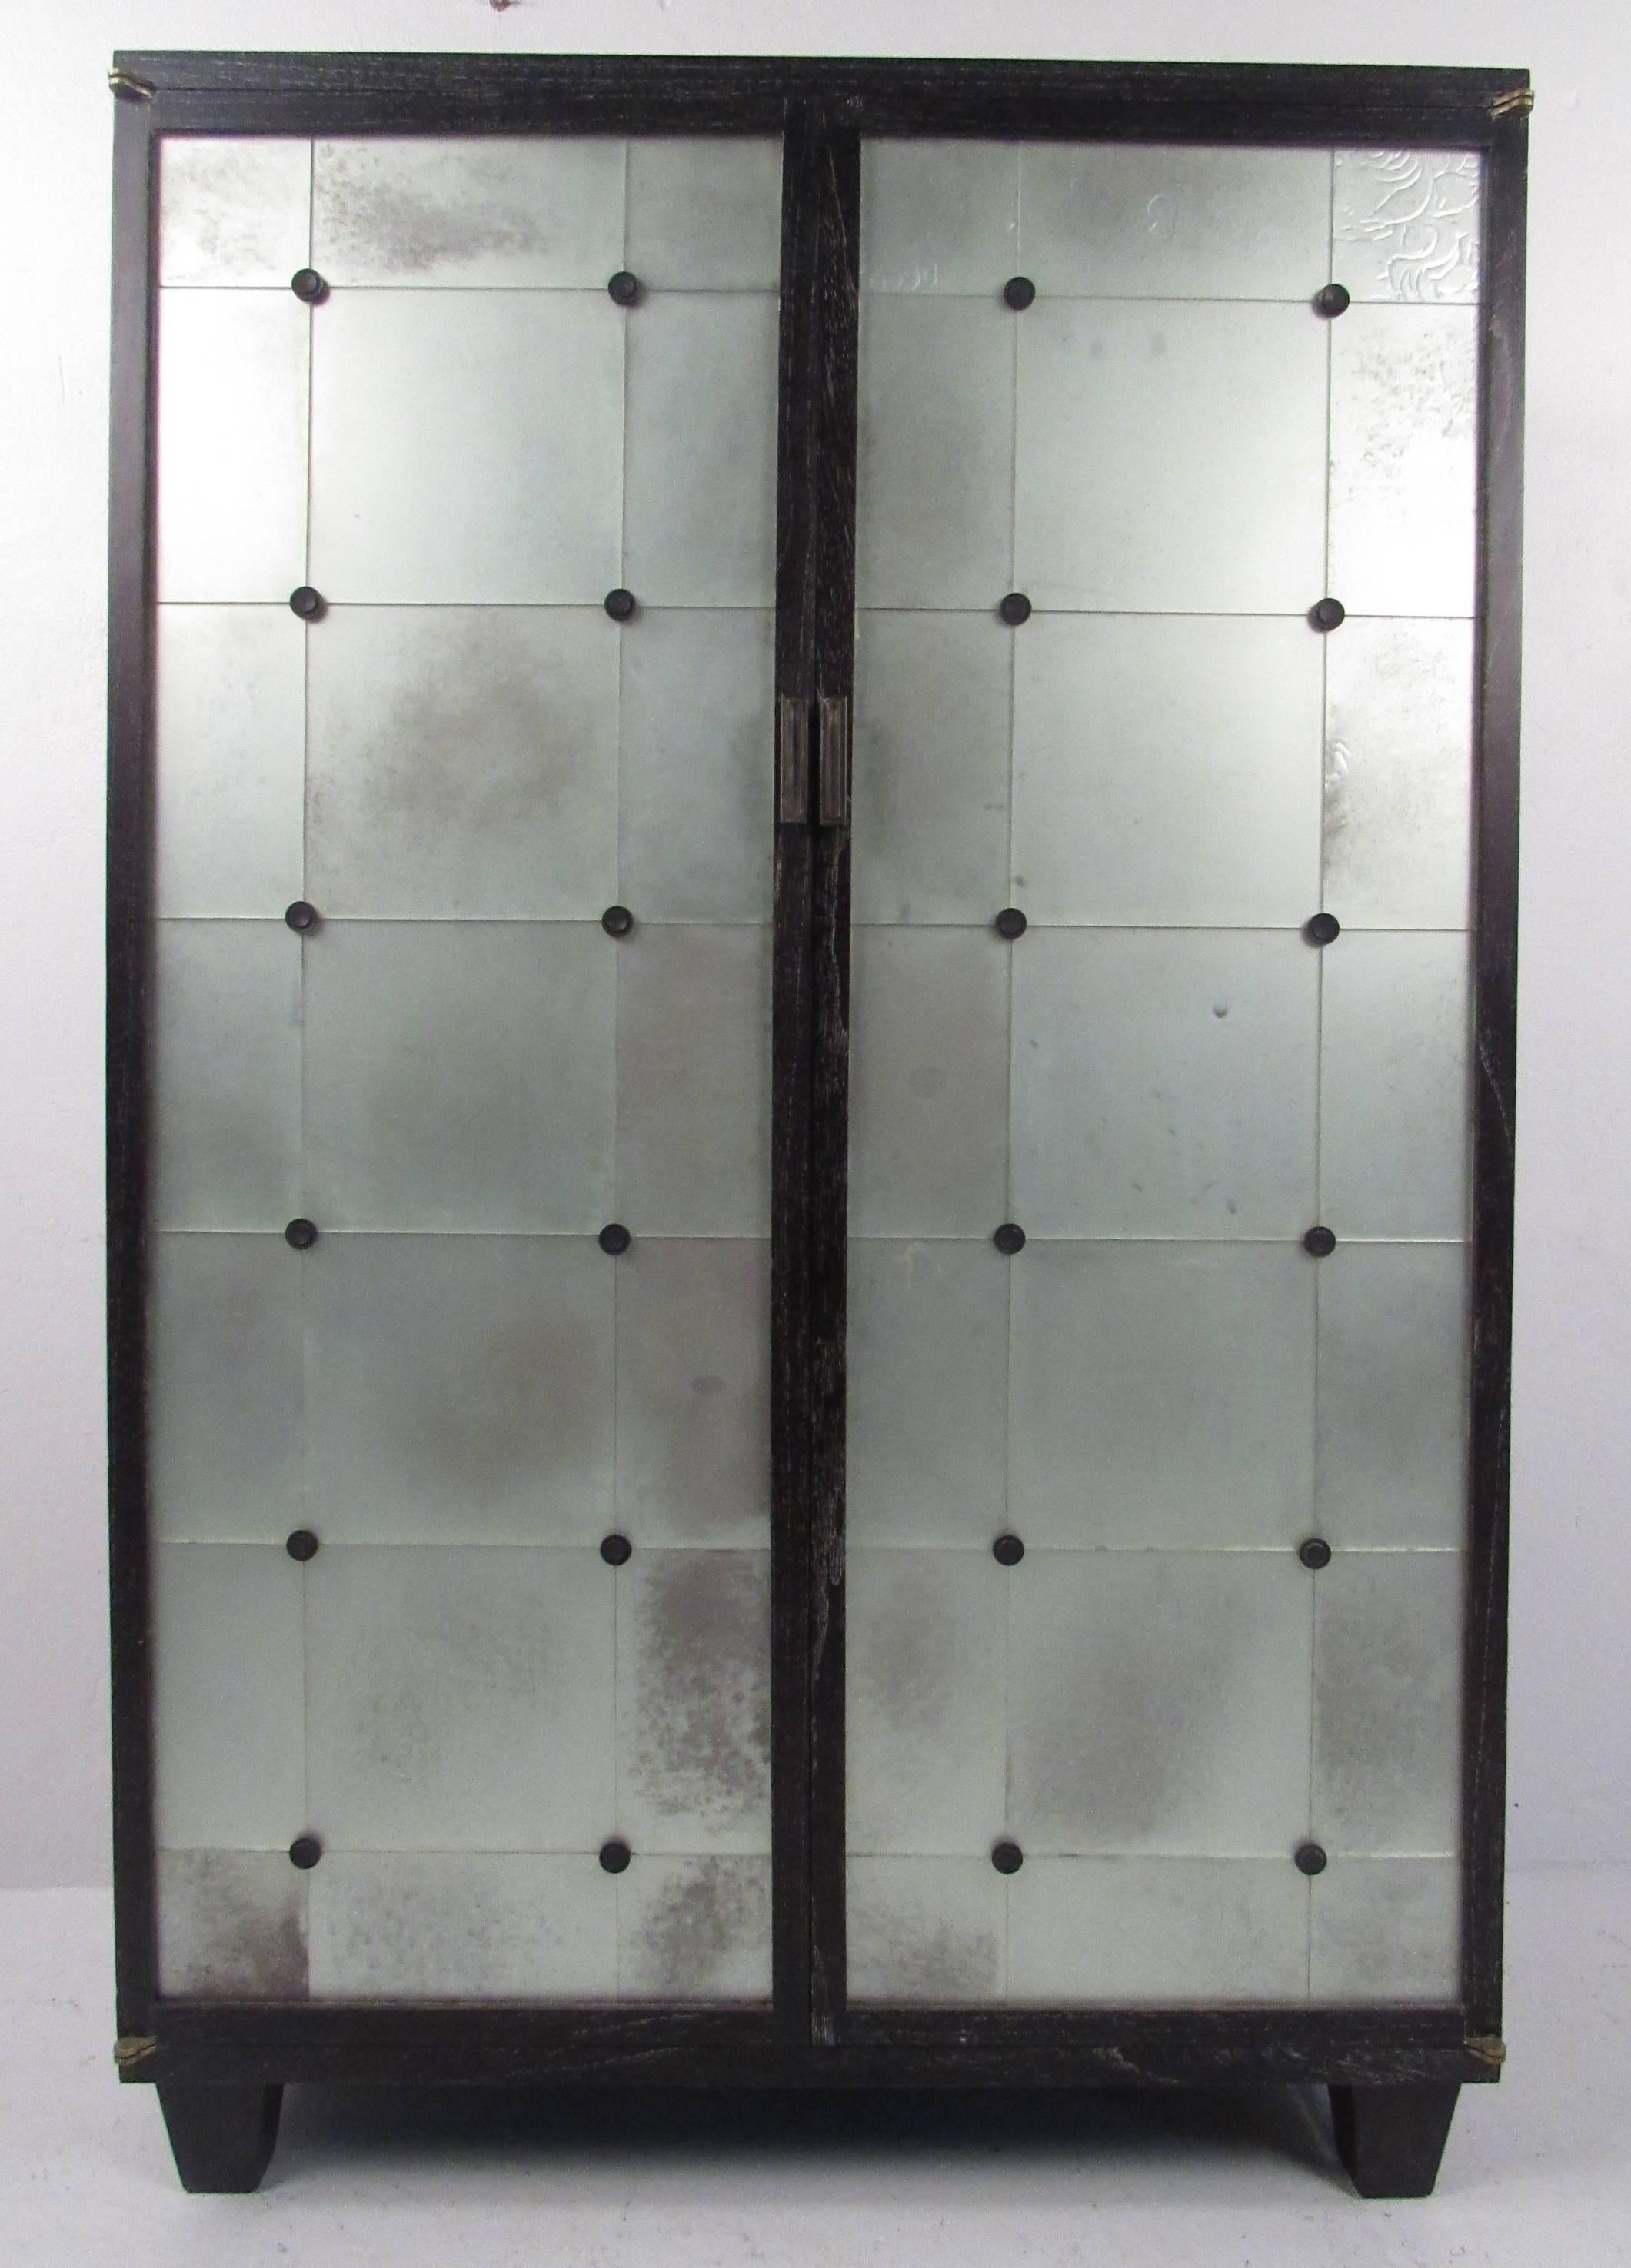 Unique frosted glass-front two-door cabinet with three internal shelves and ample space to house multiple electronic components. Please confirm item location (NY or NJ) with dealer.